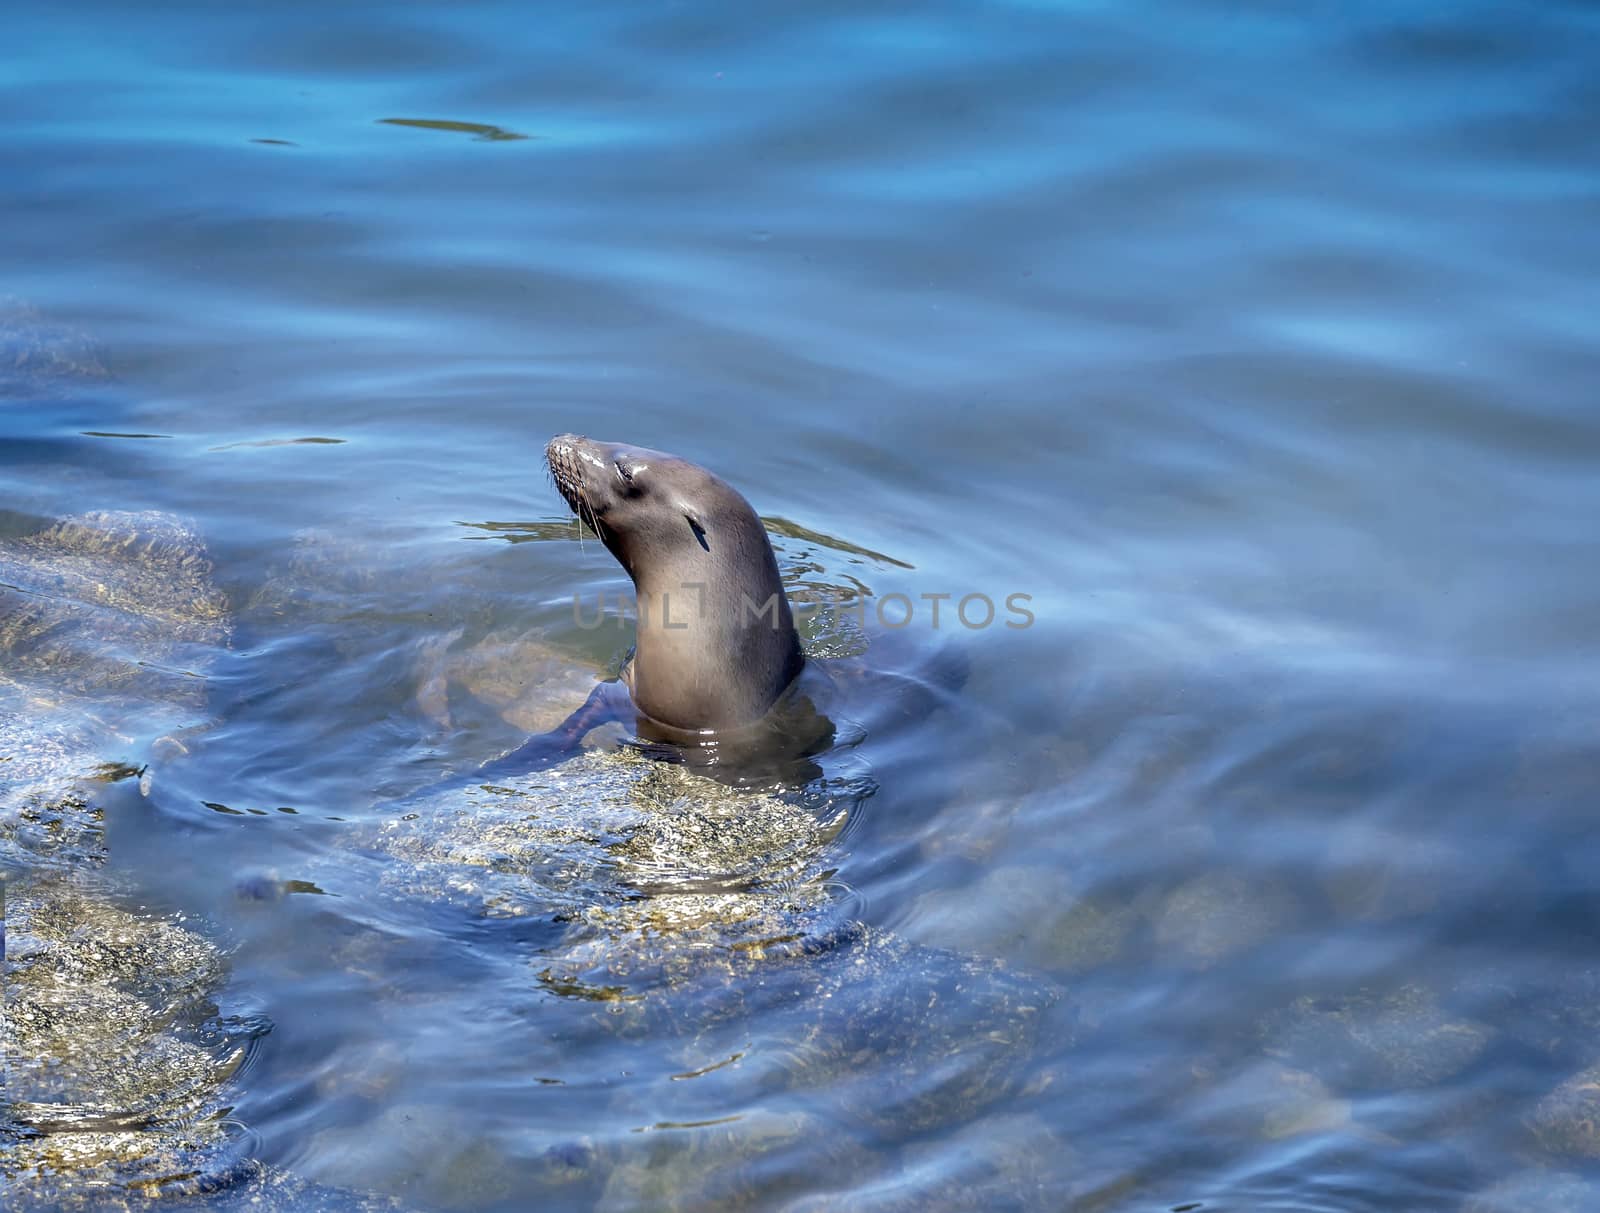 Monterey Seal by mmarfell